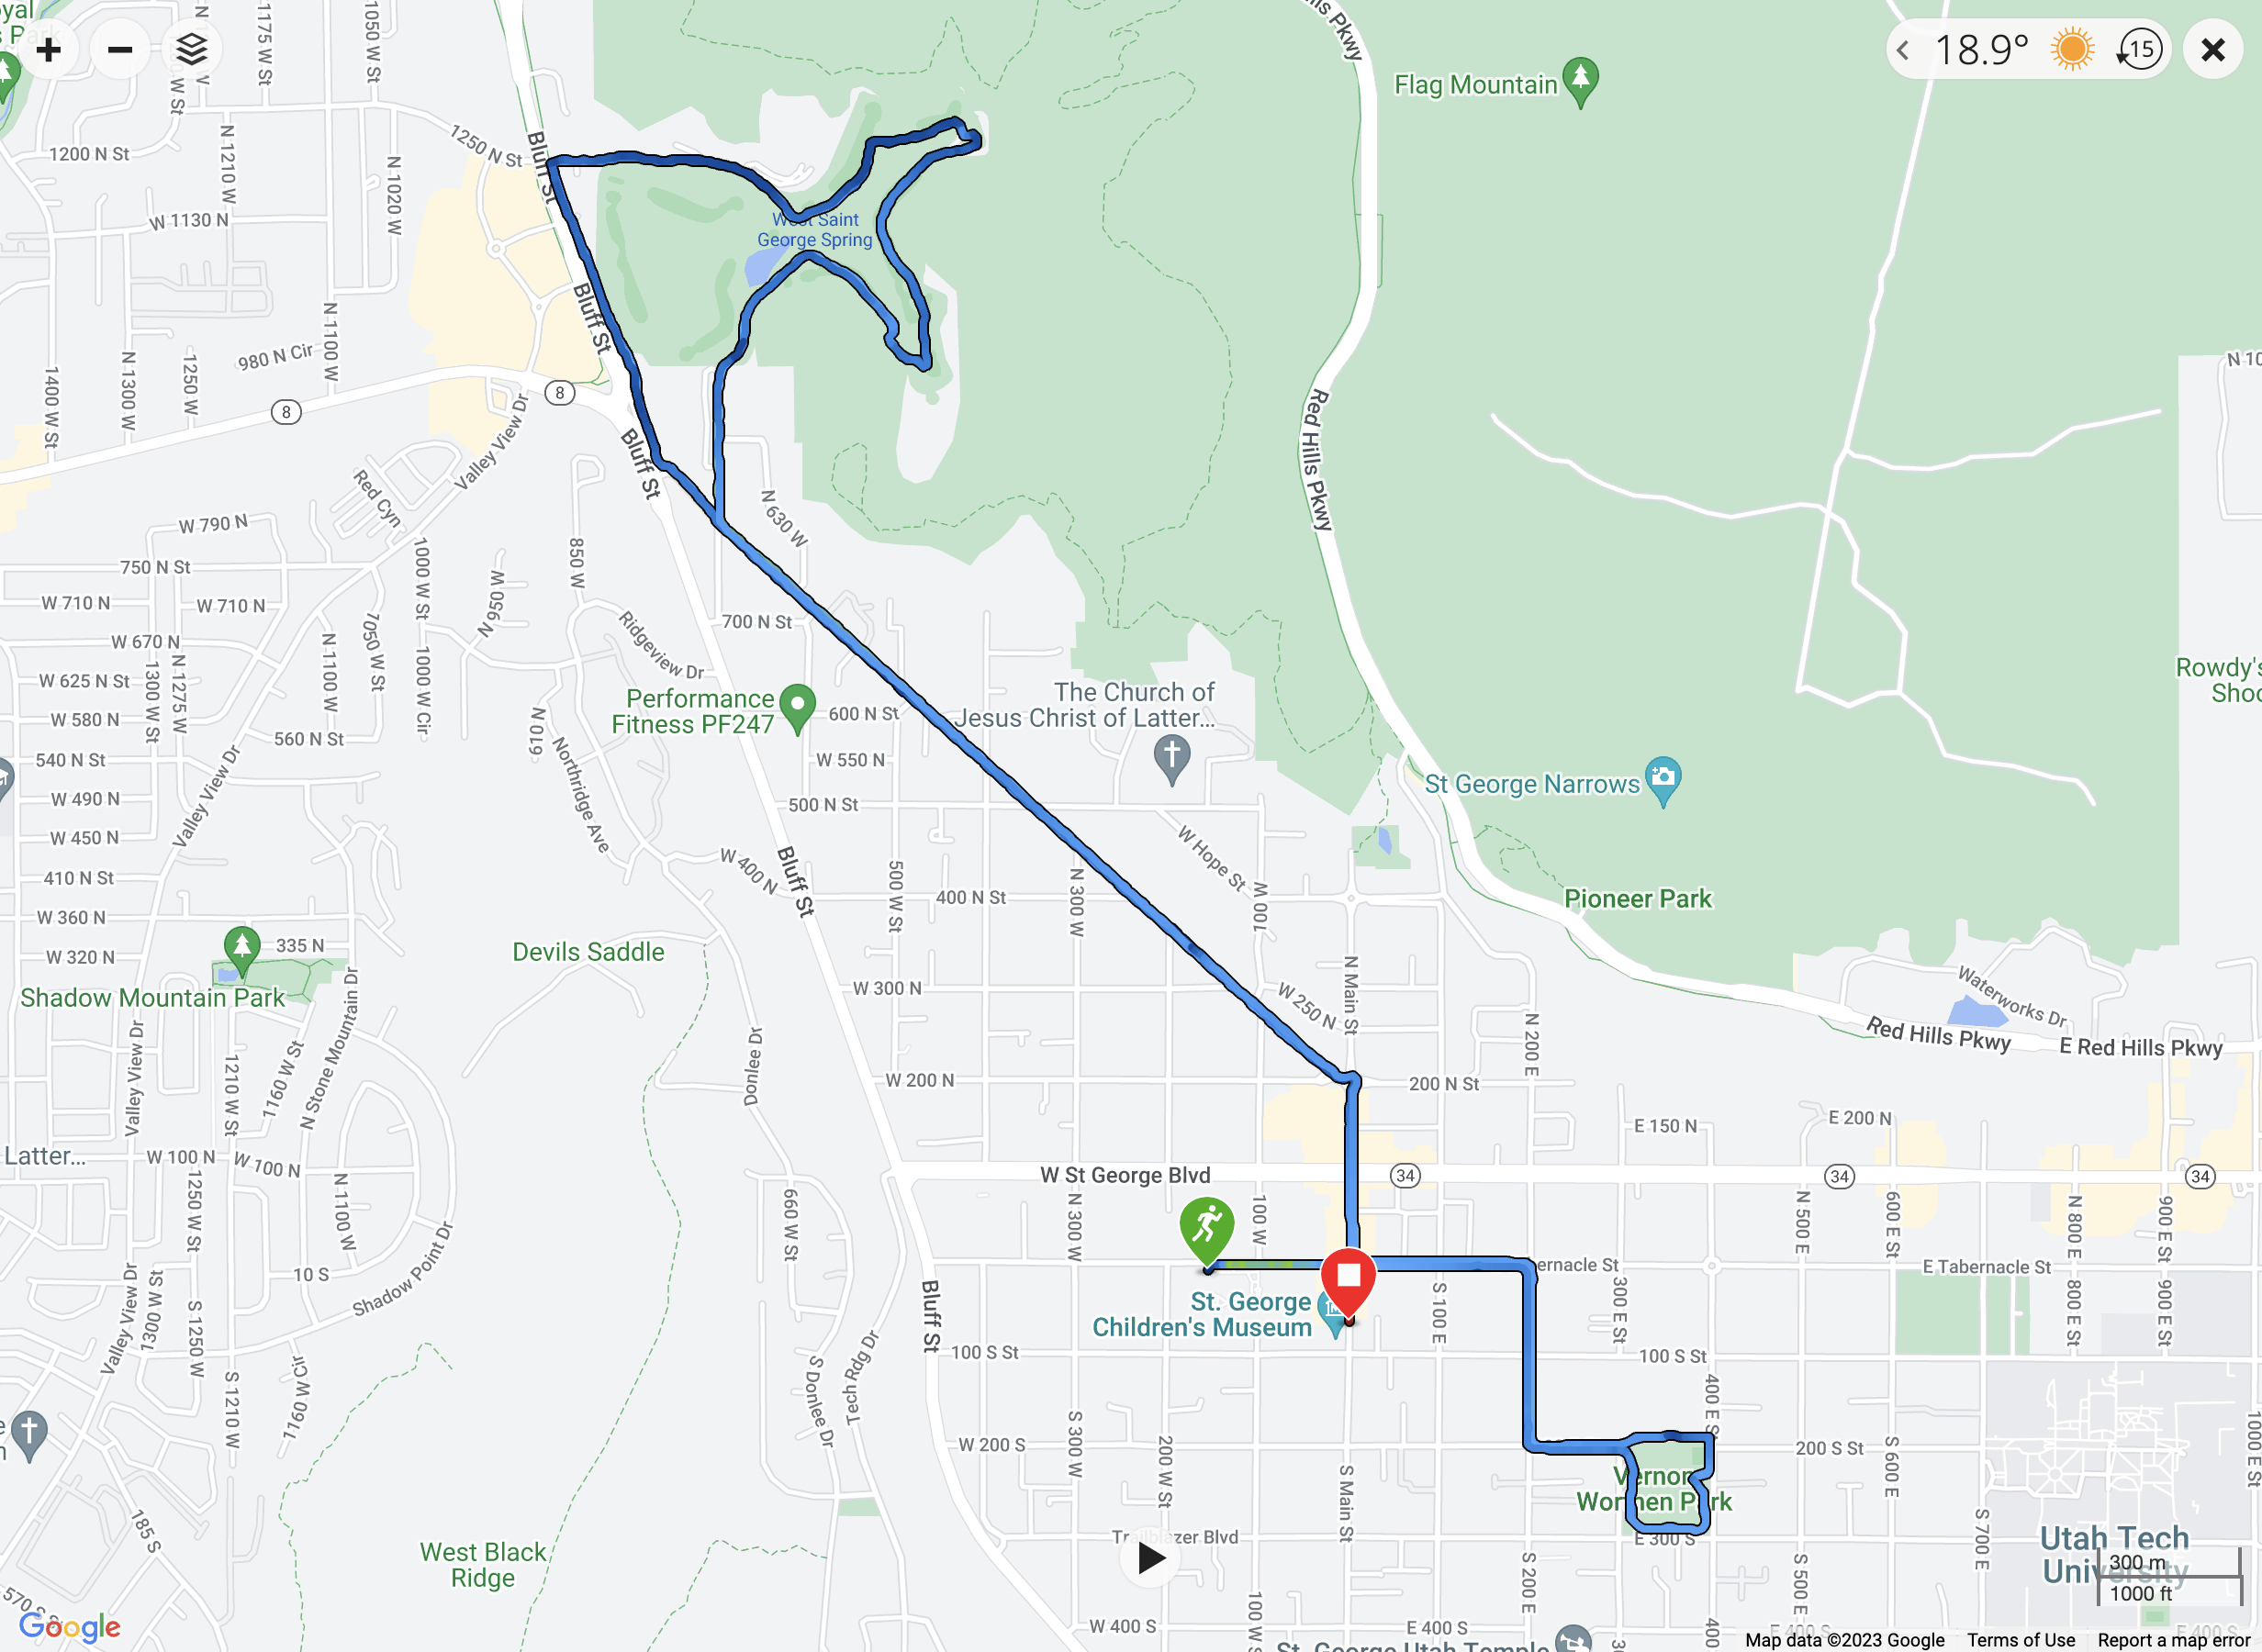 A screenshot of a Garmin Connect map showing the route of the run leg of Ironman 70.3 St. George.